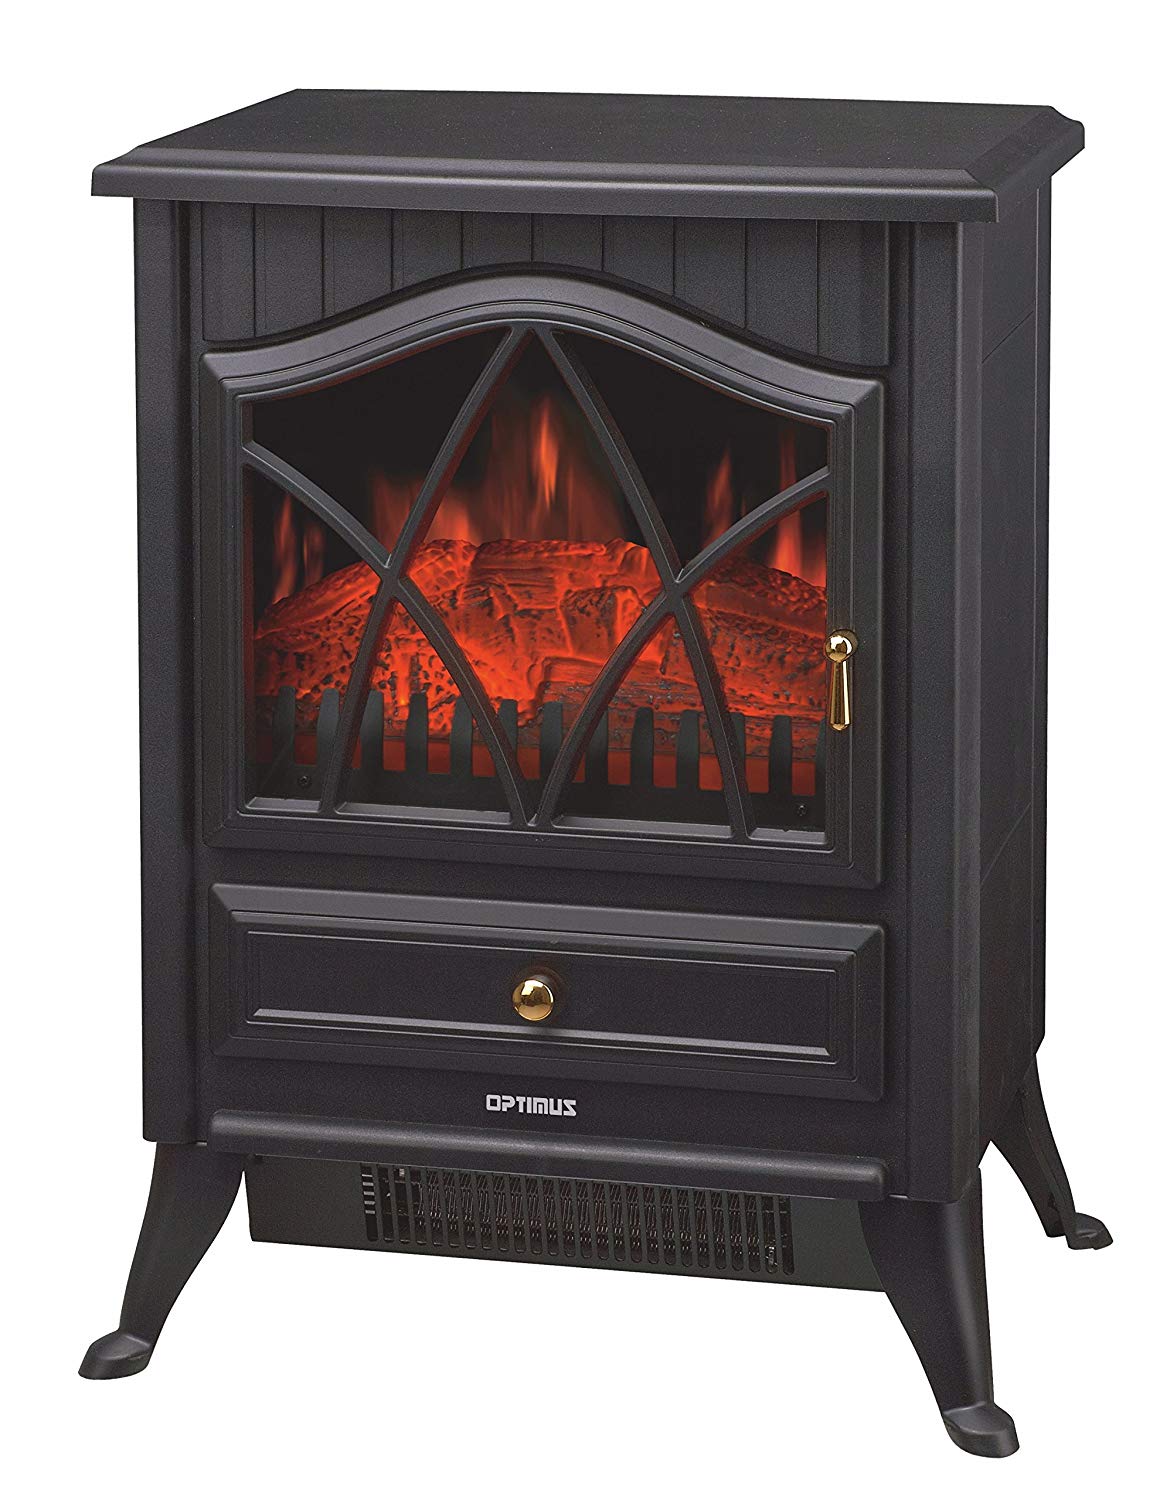 Cast Iron Electric Fireplace Best Of Amazon Optimus Electric Flame Effect Heater Home & Kitchen